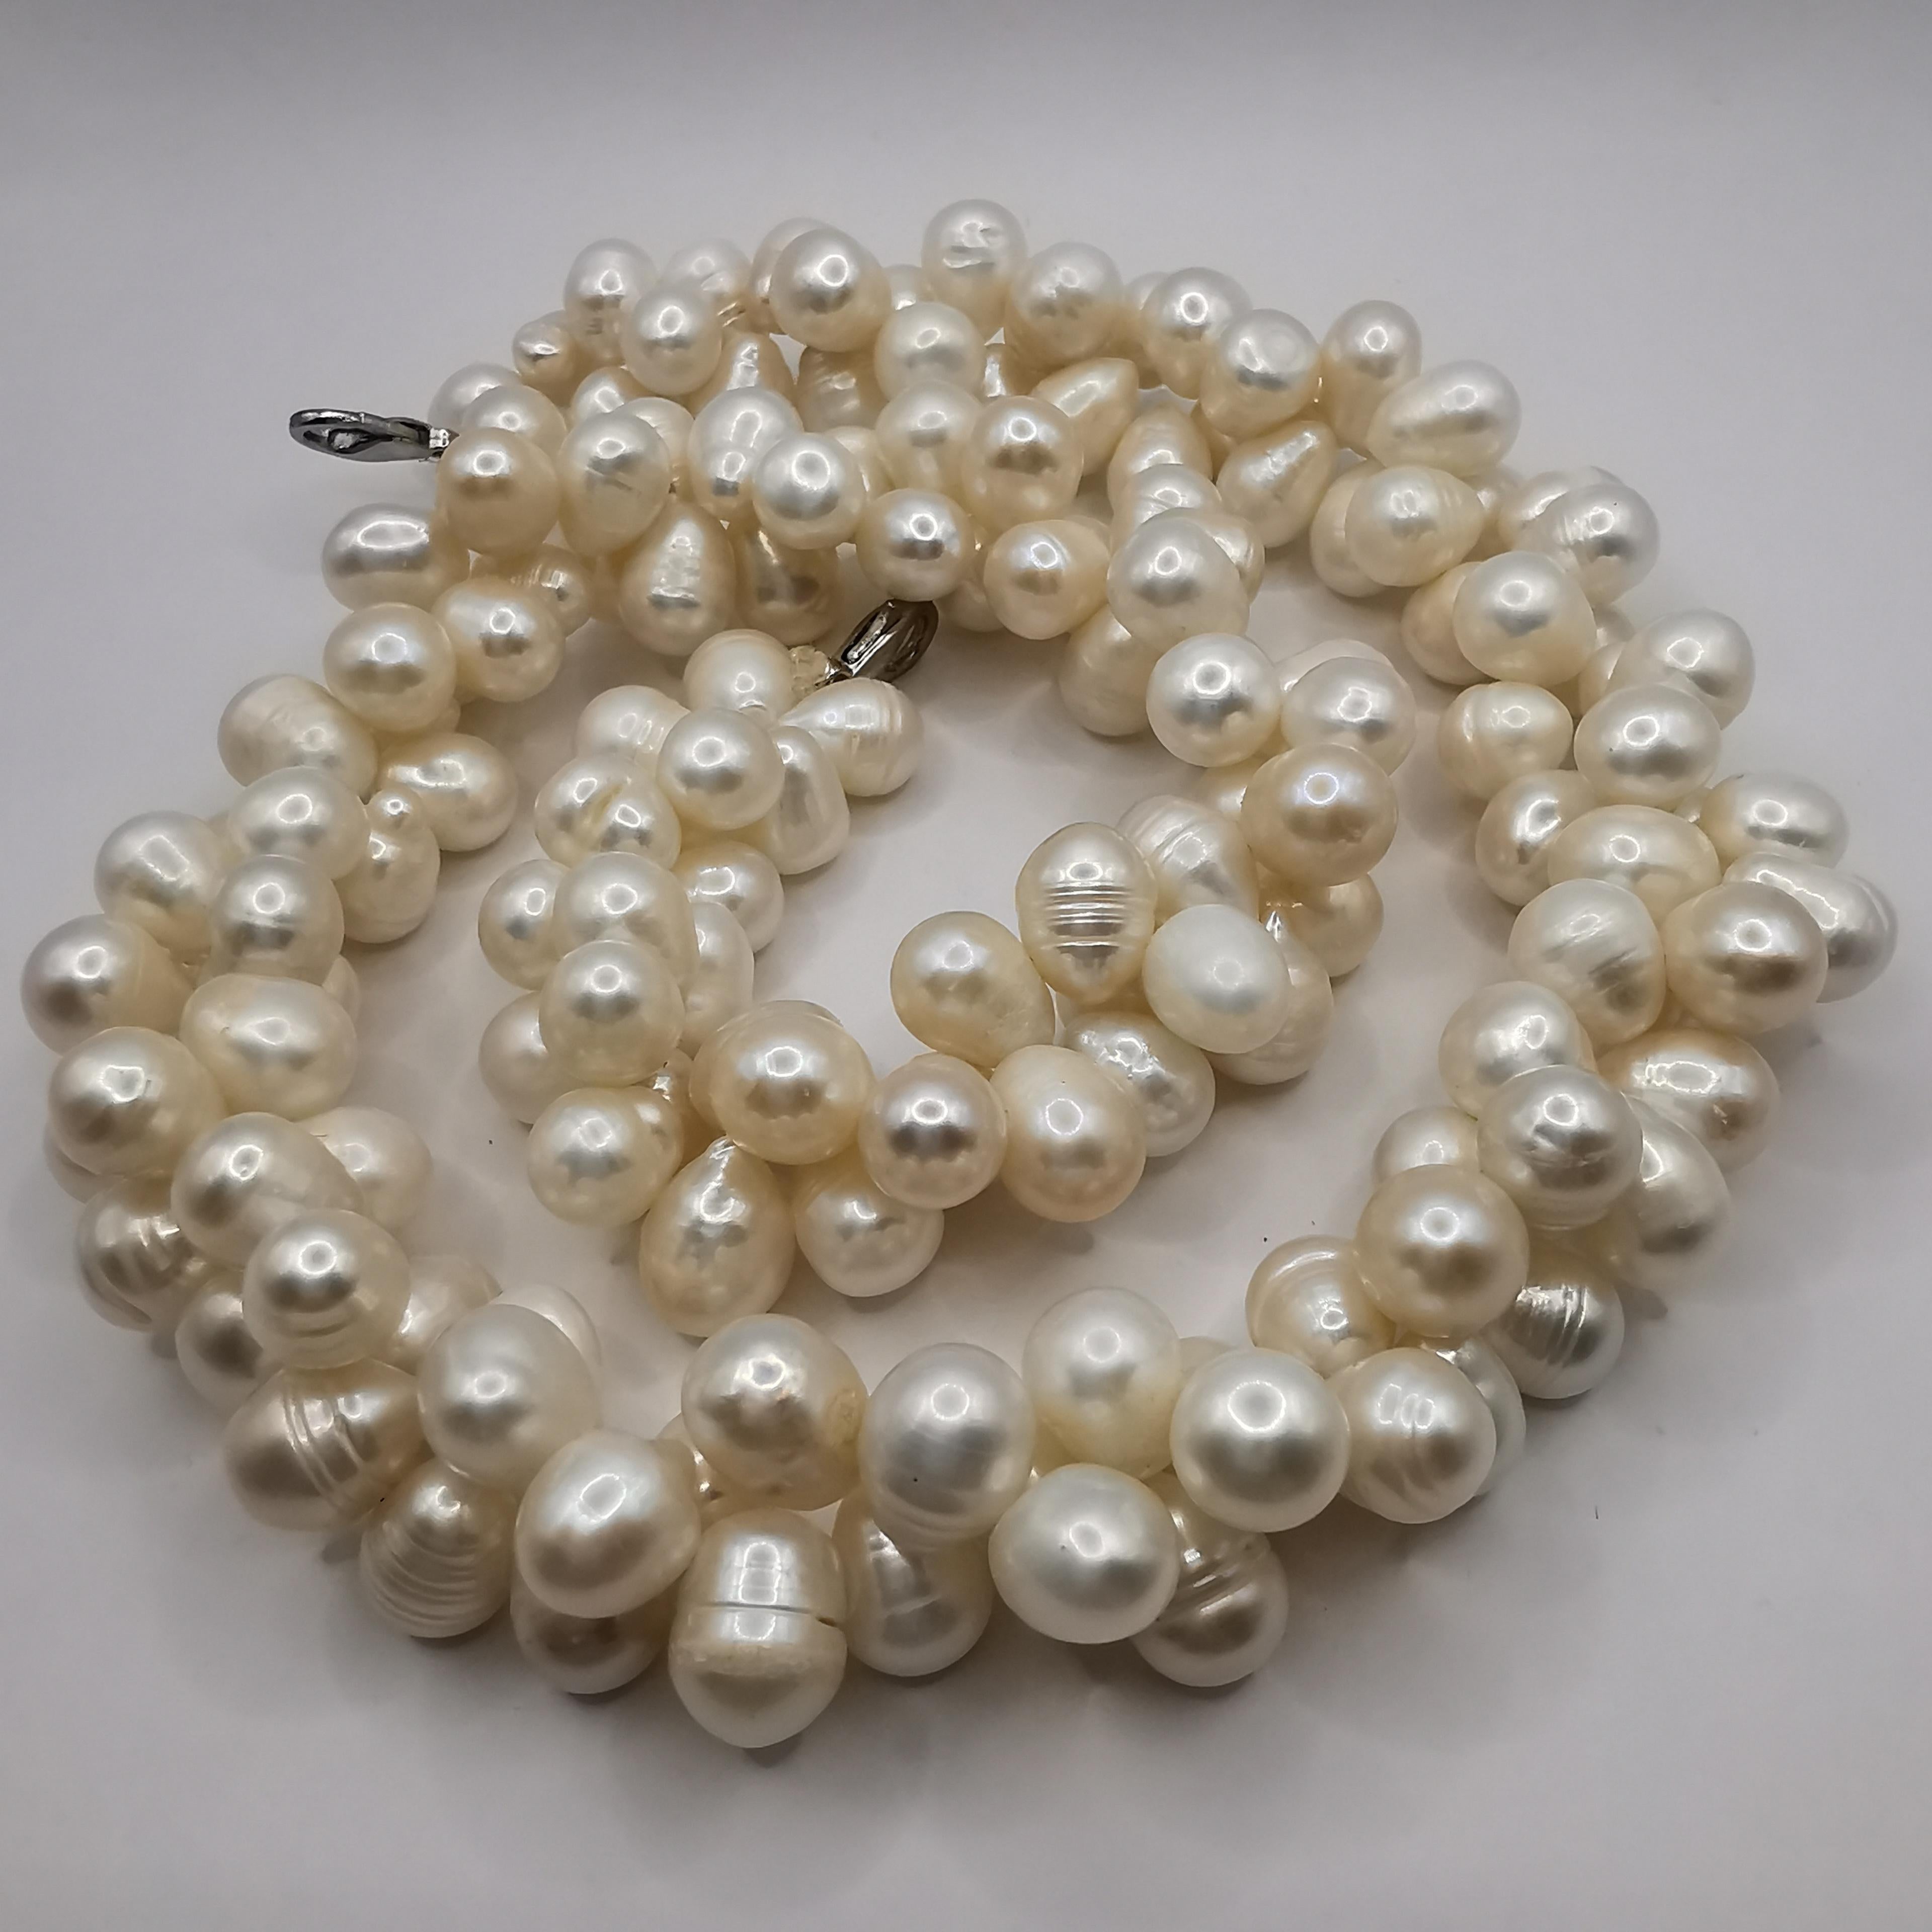 Uncut Dual Twisted Freshwater Cultured Baroque White Pearl Necklace For Sale